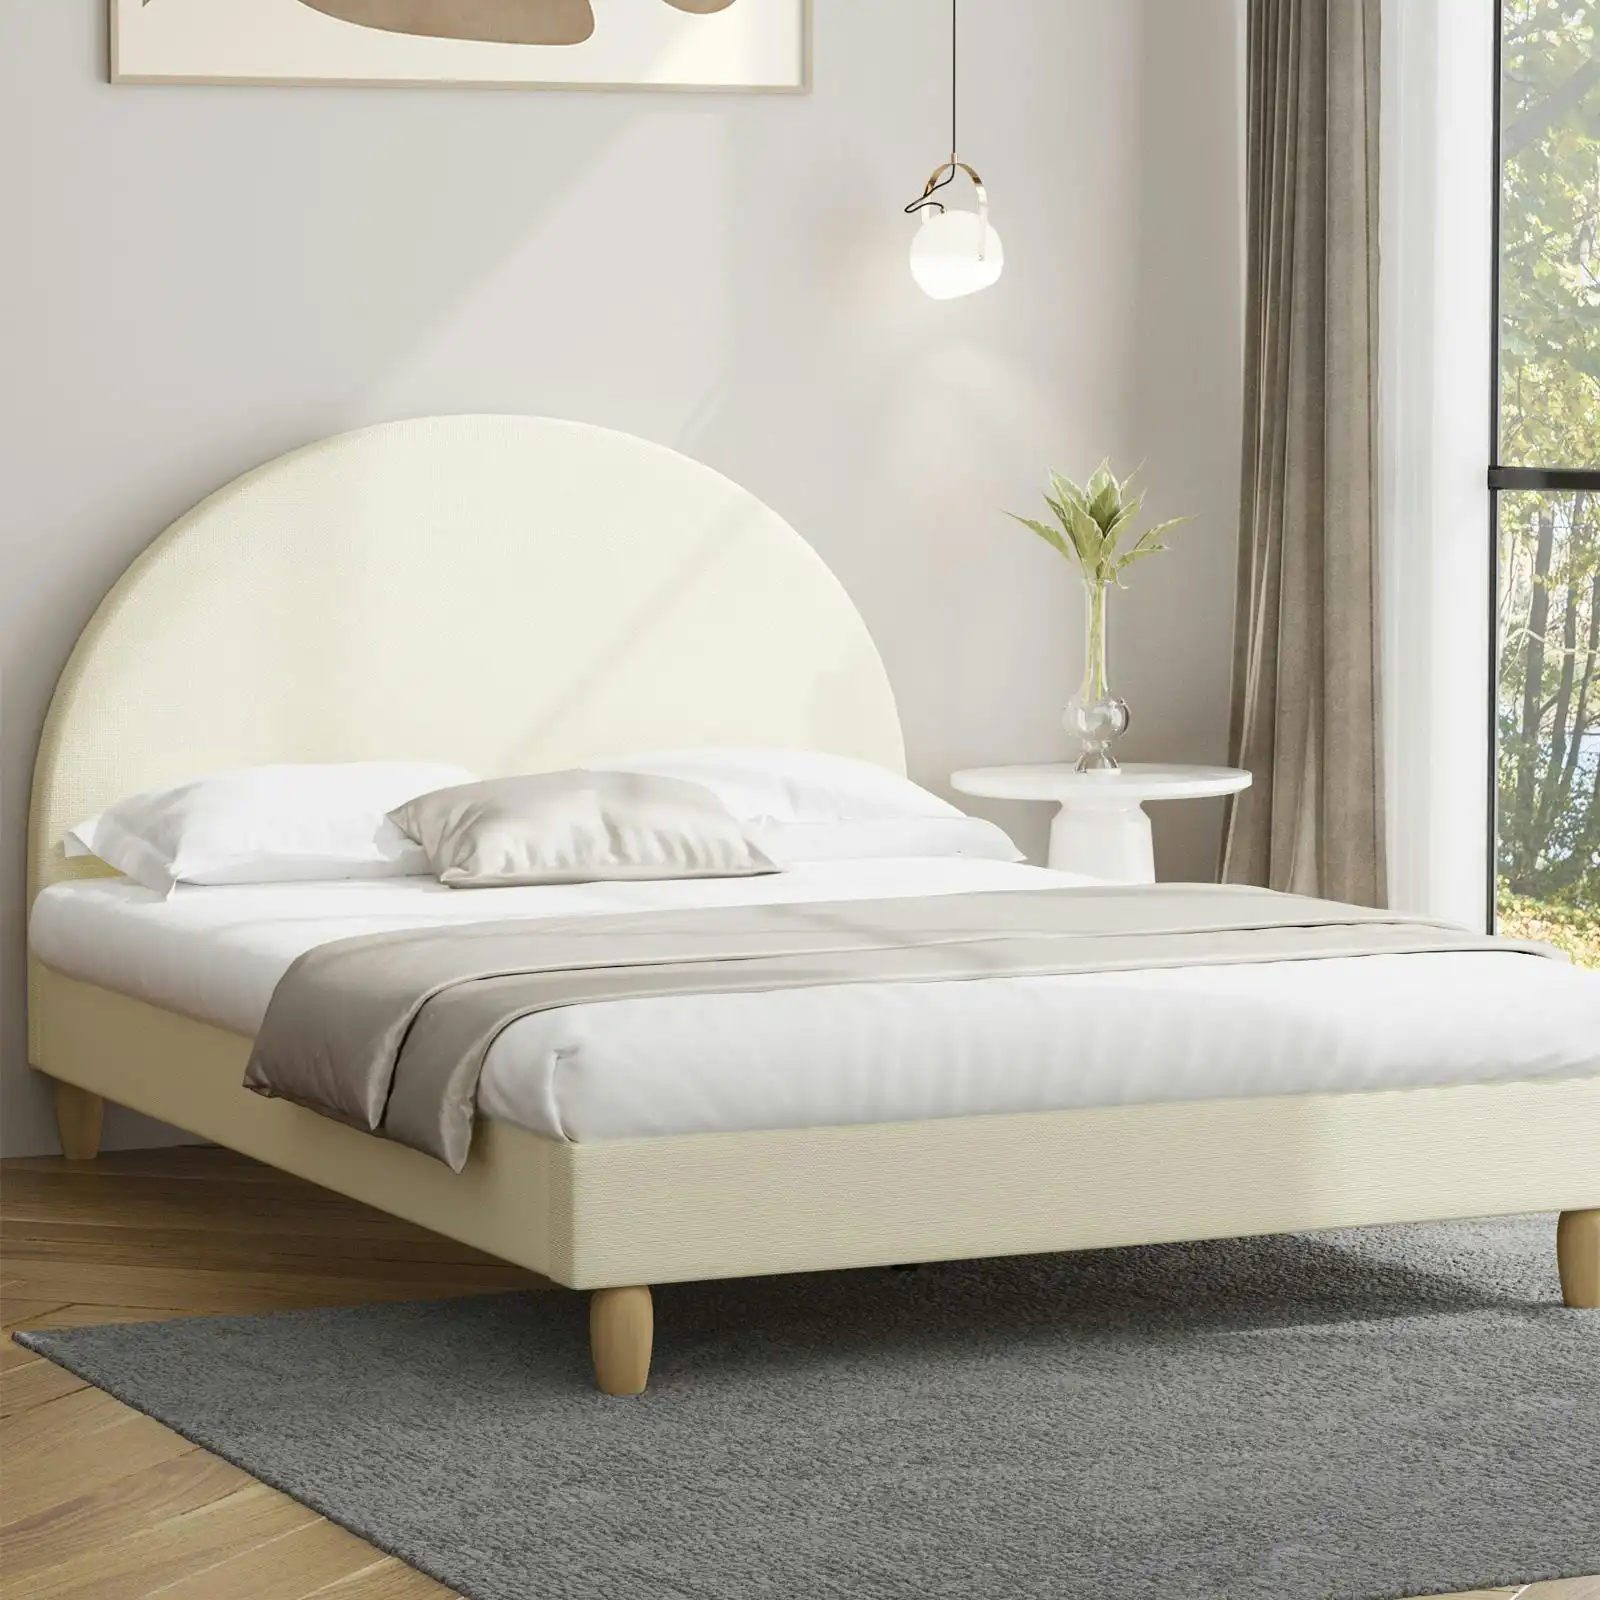 Oikiture Bed Frame King Single Size Beige Fabric Arched Beds Platform